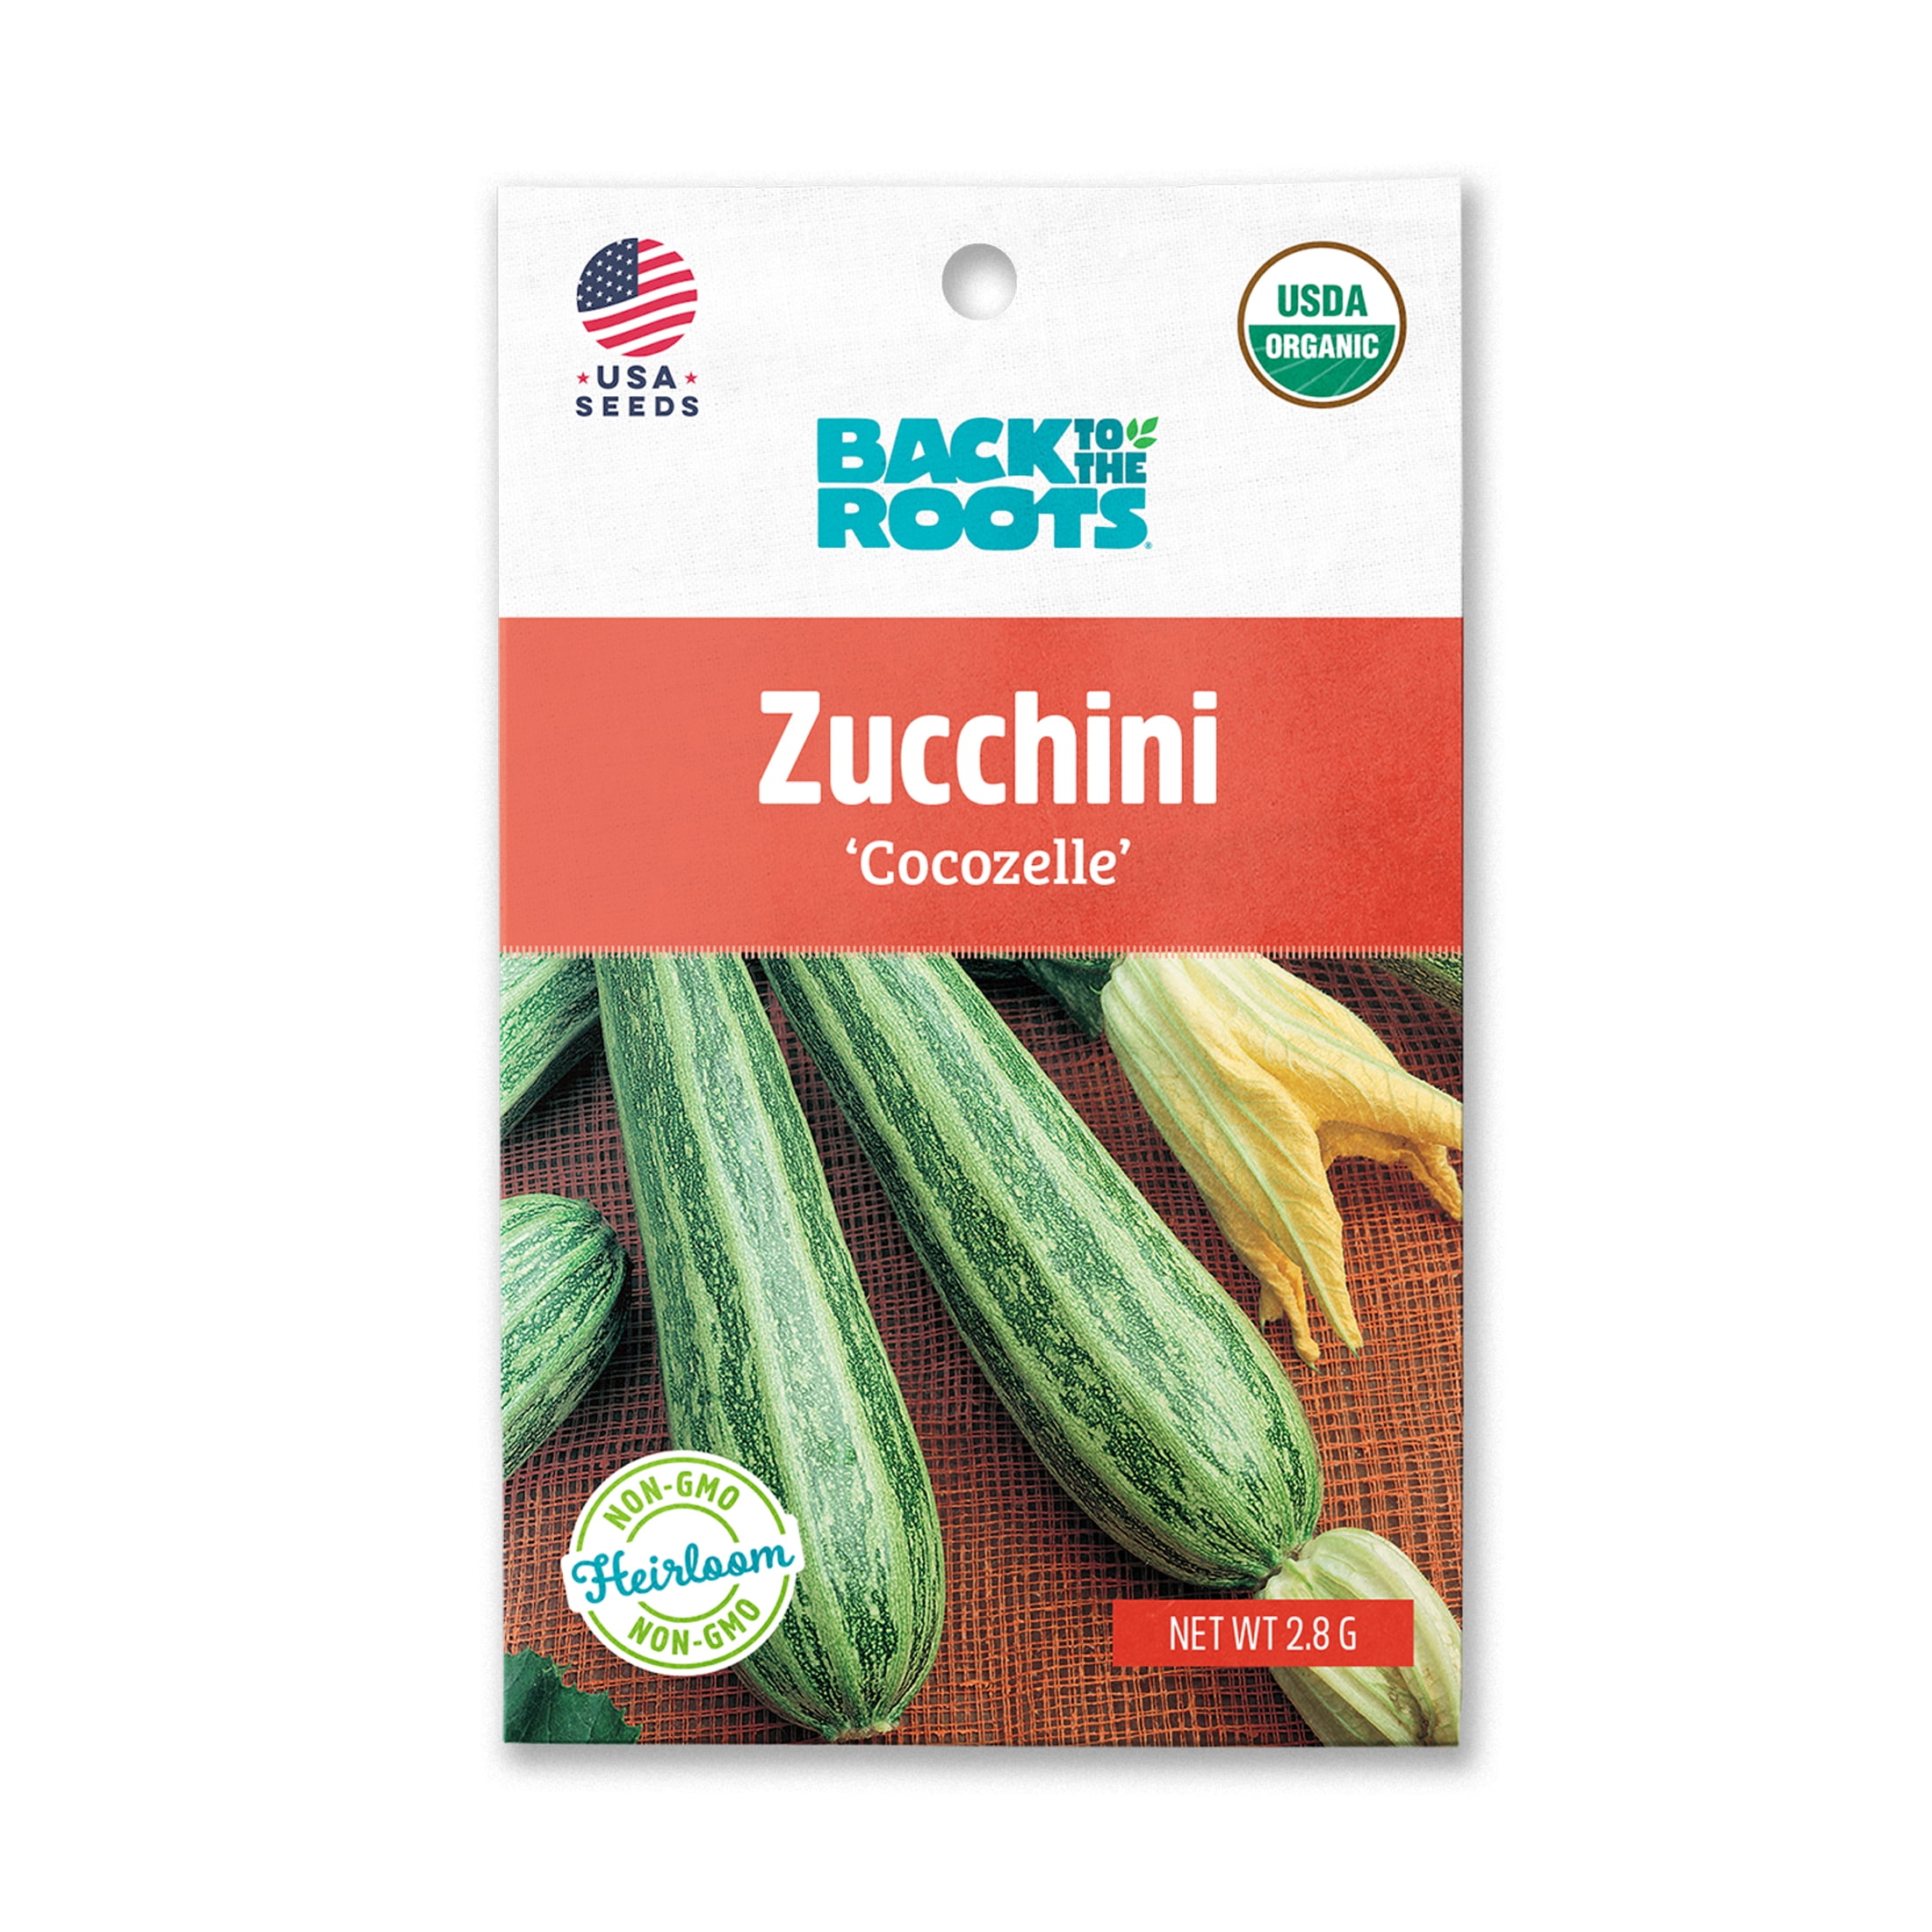 Back to the Roots Organic Cocozelle Zucchini Heirloom Vegetable Seeds, 1 Seed Packet